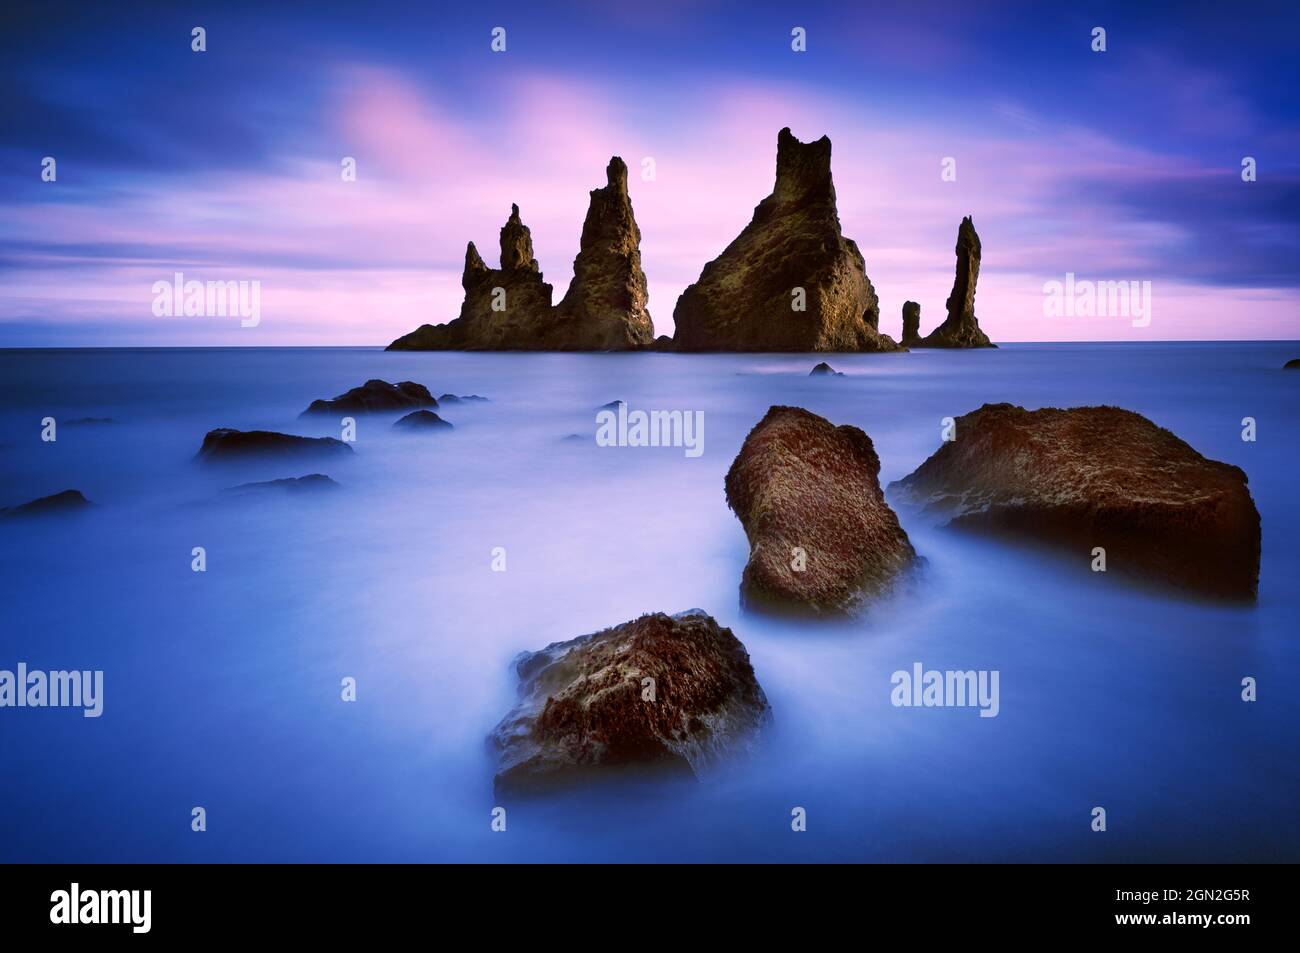 ICELAND, VIK, GENERAL VIEW OF REYNISDRANGAR IN LONG POSE AT THE BLUE HOUR Stock Photo